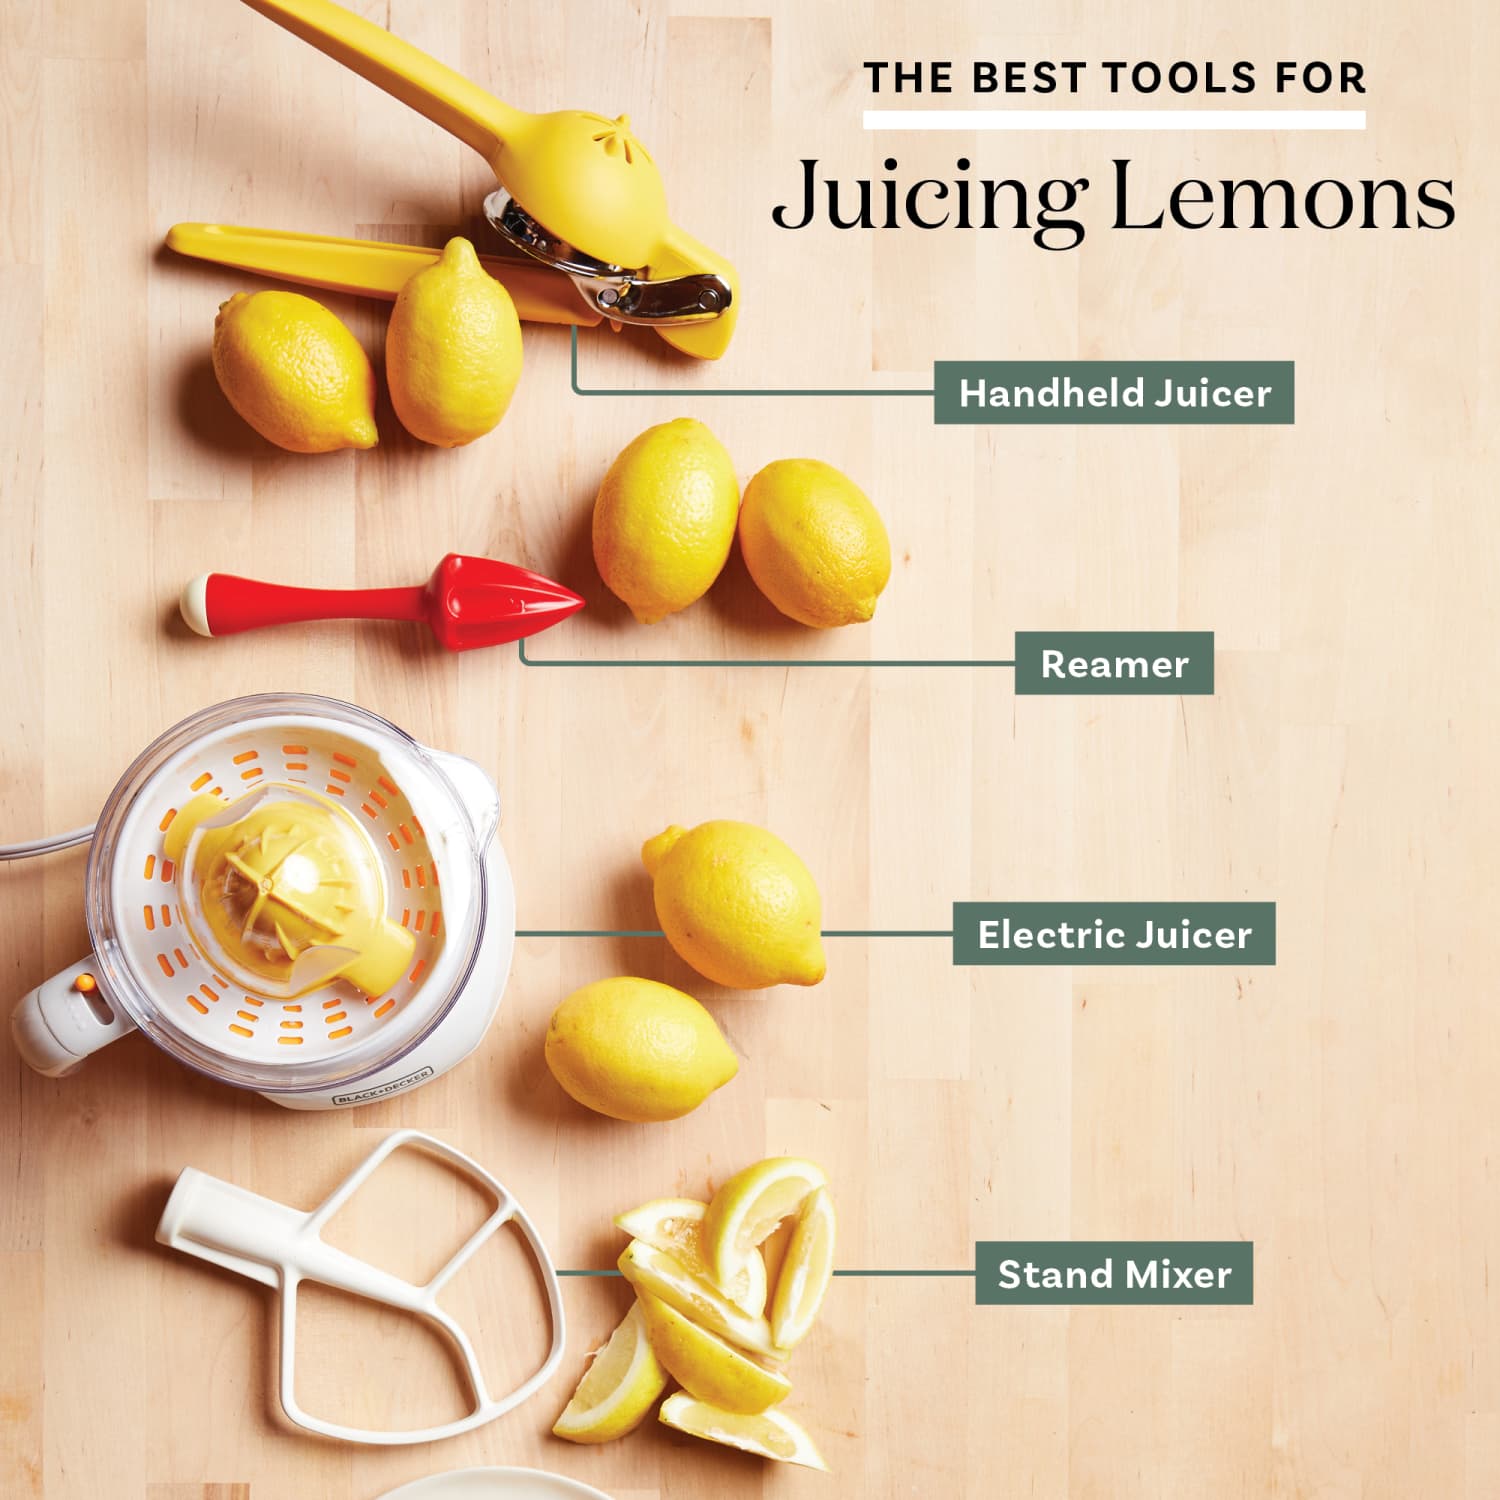 How Long Does It Take To Juice A Lemon With A Lemon Juicer?